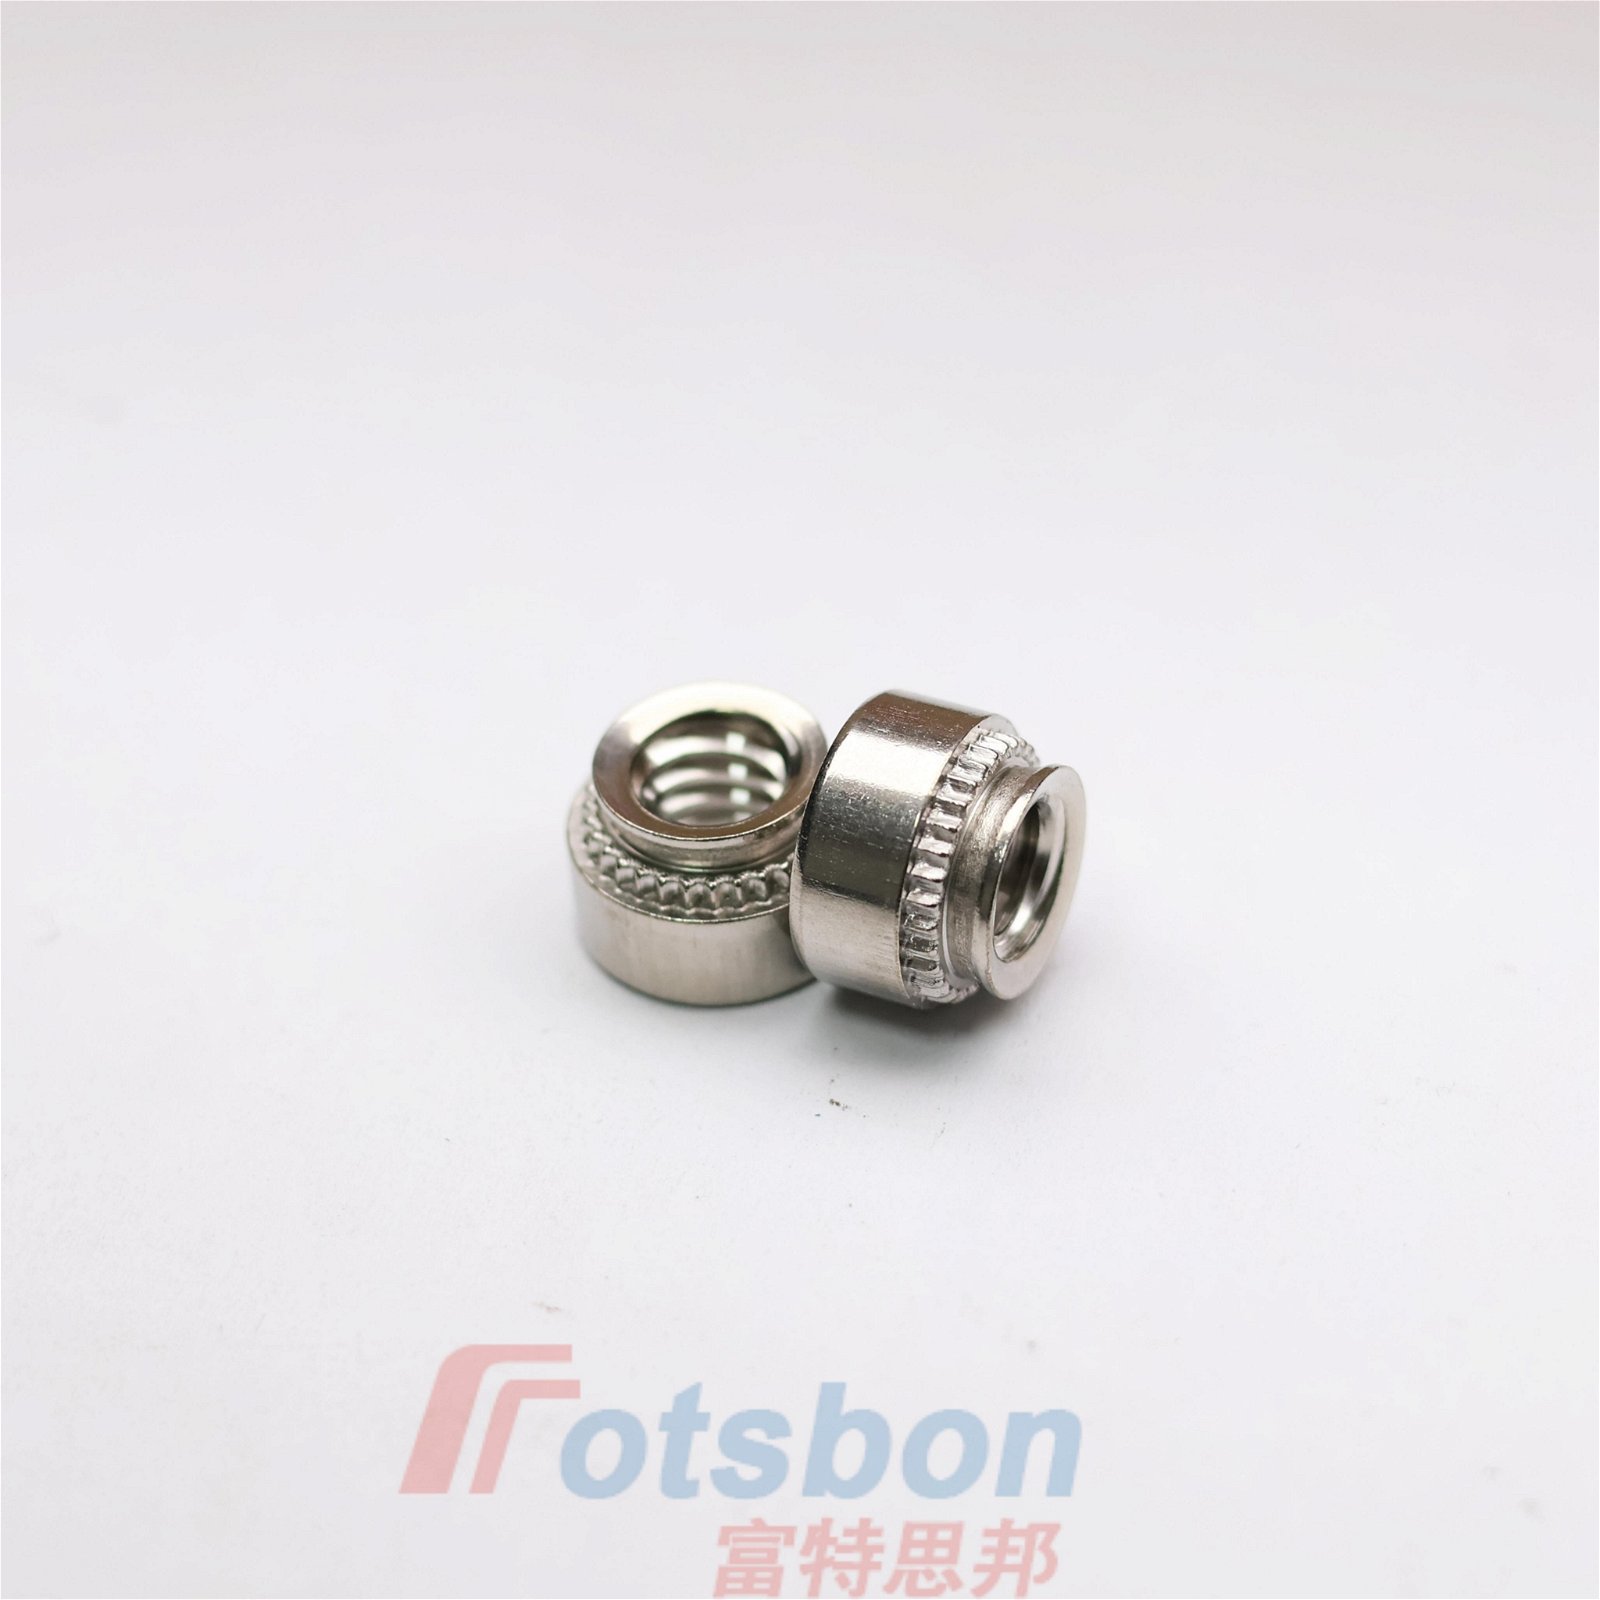 Self-Clinching Nuts CLS-632-1Stainless Inch Threaded 4